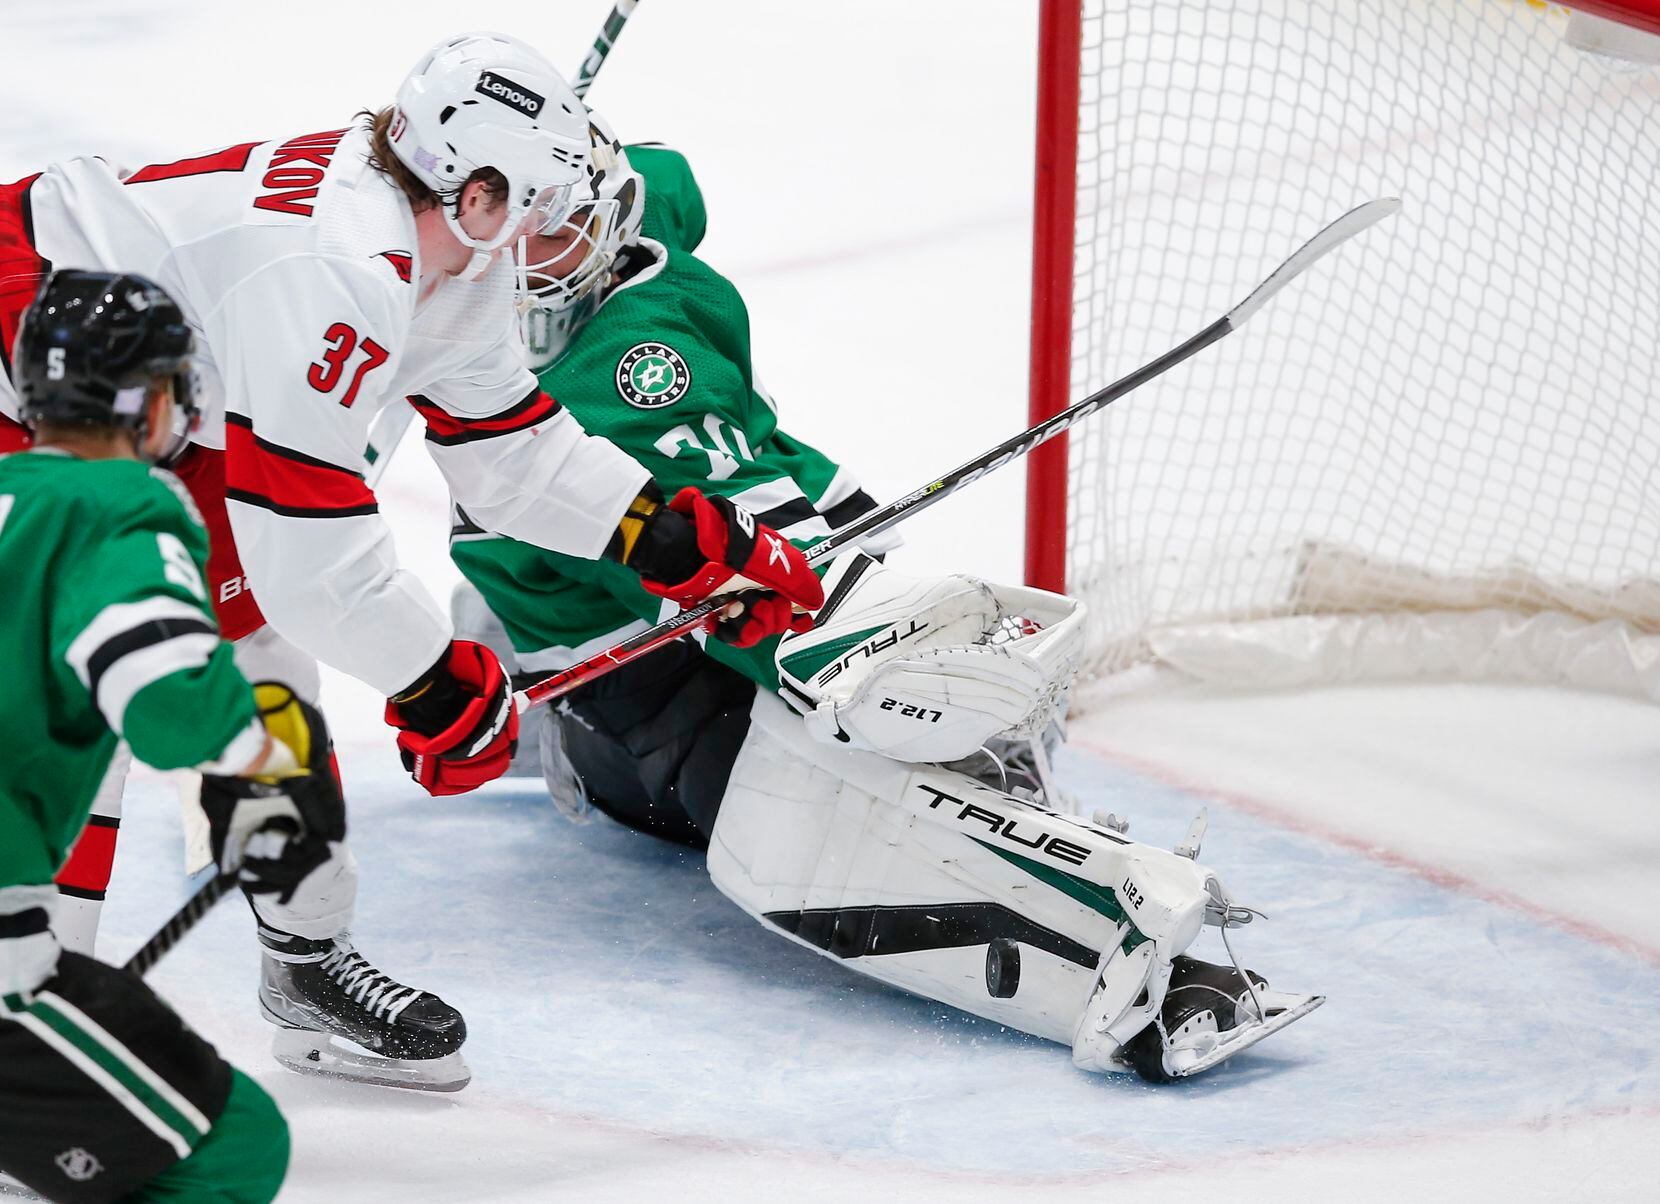 Dallas Stars goaltender Braden Holtby (70) stops a shot by Carolina Hurricanes forward Andrei Svechnikov (37) during the third period of an NHL hockey game in Dallas, Tuesday, November 30, 2021. Dallas won 4-1. (Brandon Wade/Special Contributor)